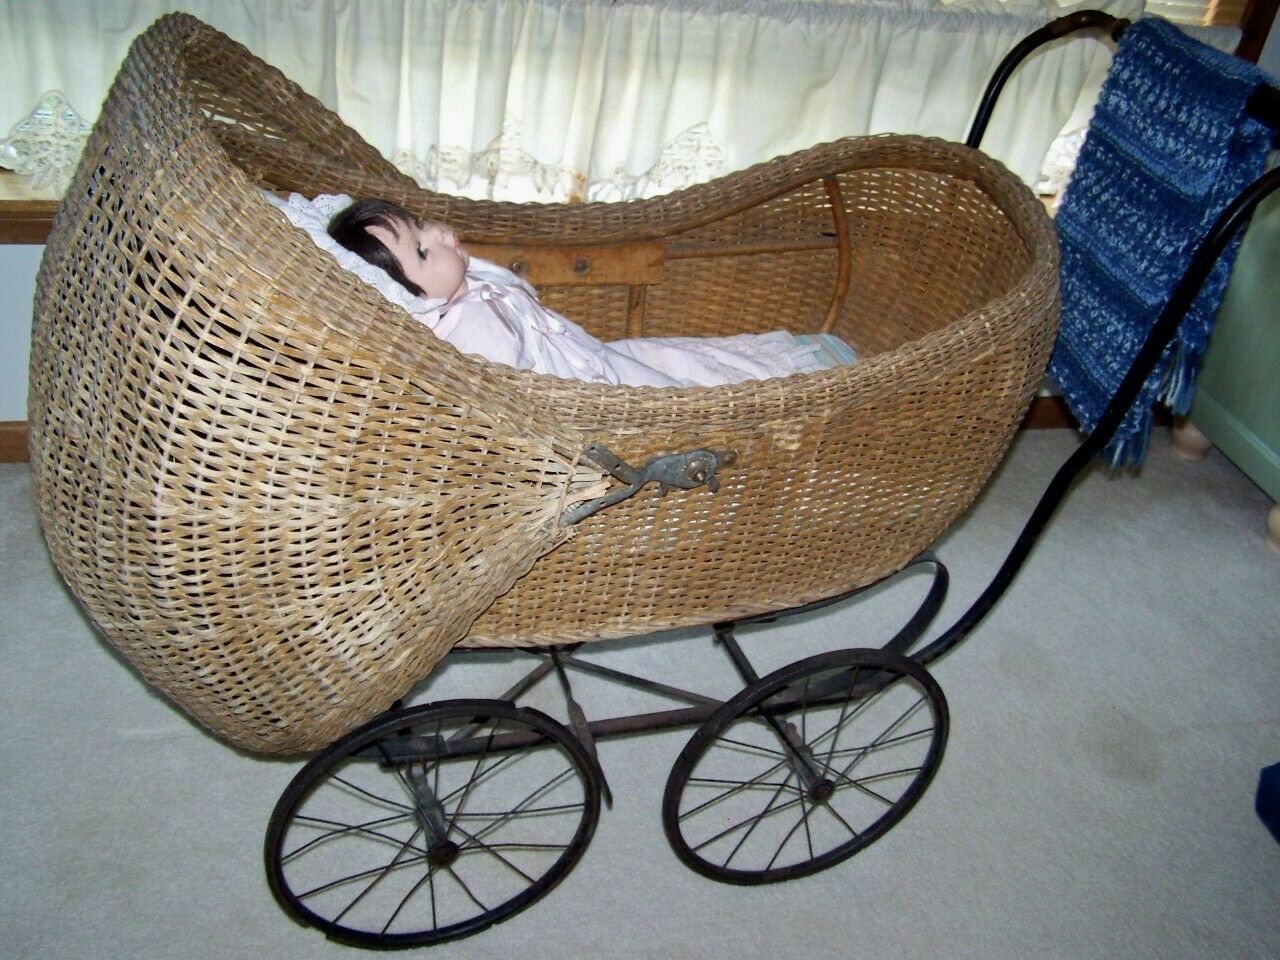 1900ish Wicker Baby Buggy  Very Unique Good Condition For Its Age